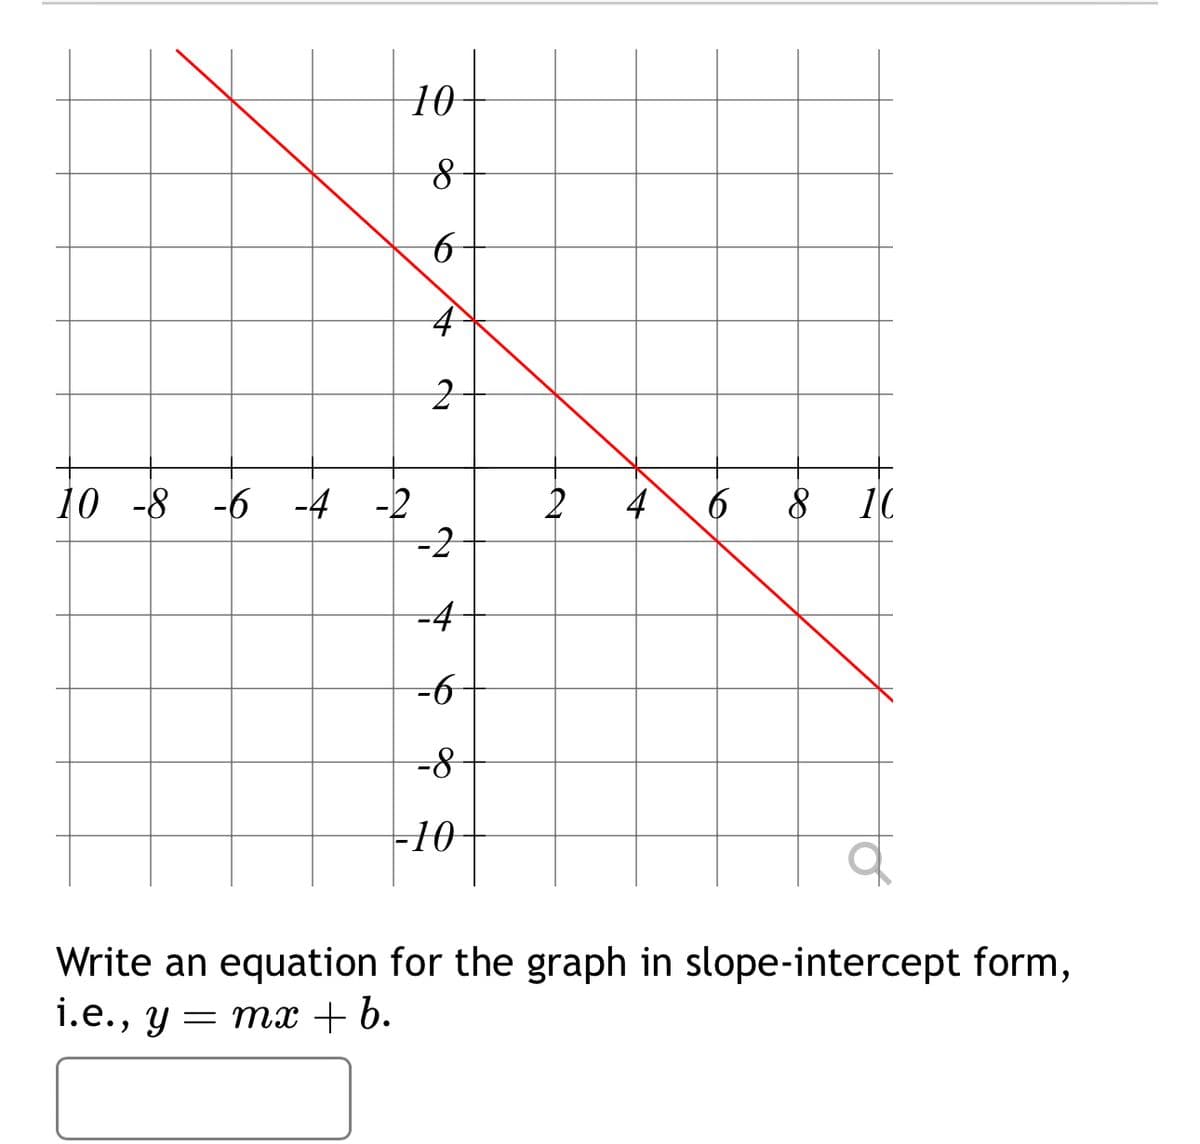 10
8
10
6
+
2
10 -8 -6-4
-2
2
4
6 8
10
-2
-4
-6
-8
-10
Write an equation for the graph in slope-intercept form,
i.e., y = mx + b.